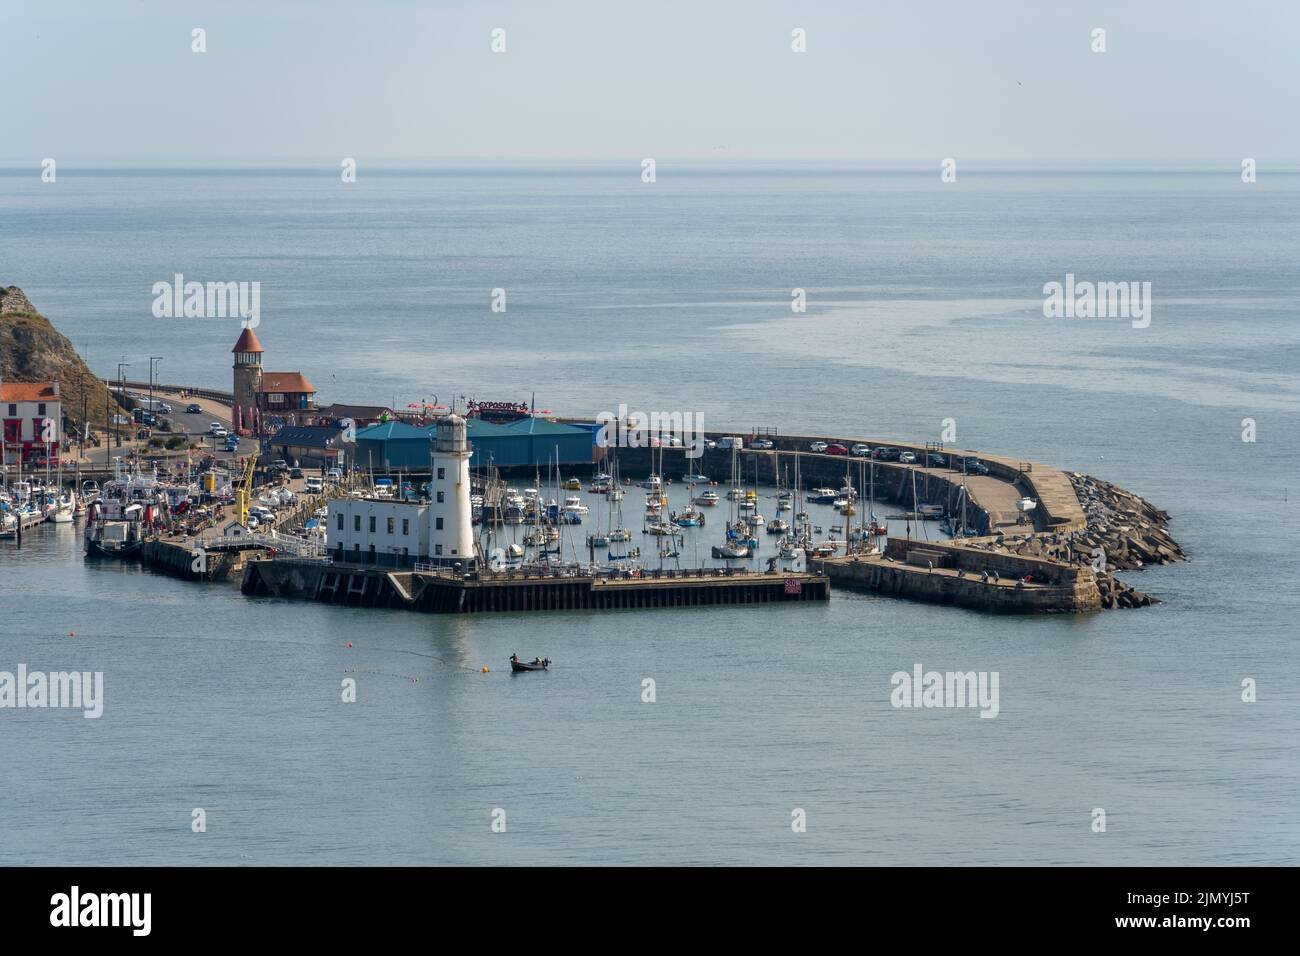 SCARBOROUGH,  NORTH YORKSHIRE, UK - JULY 18: View of the harbour in Scarborough, North Yorkshire on July 18, 2022 Stock Photo